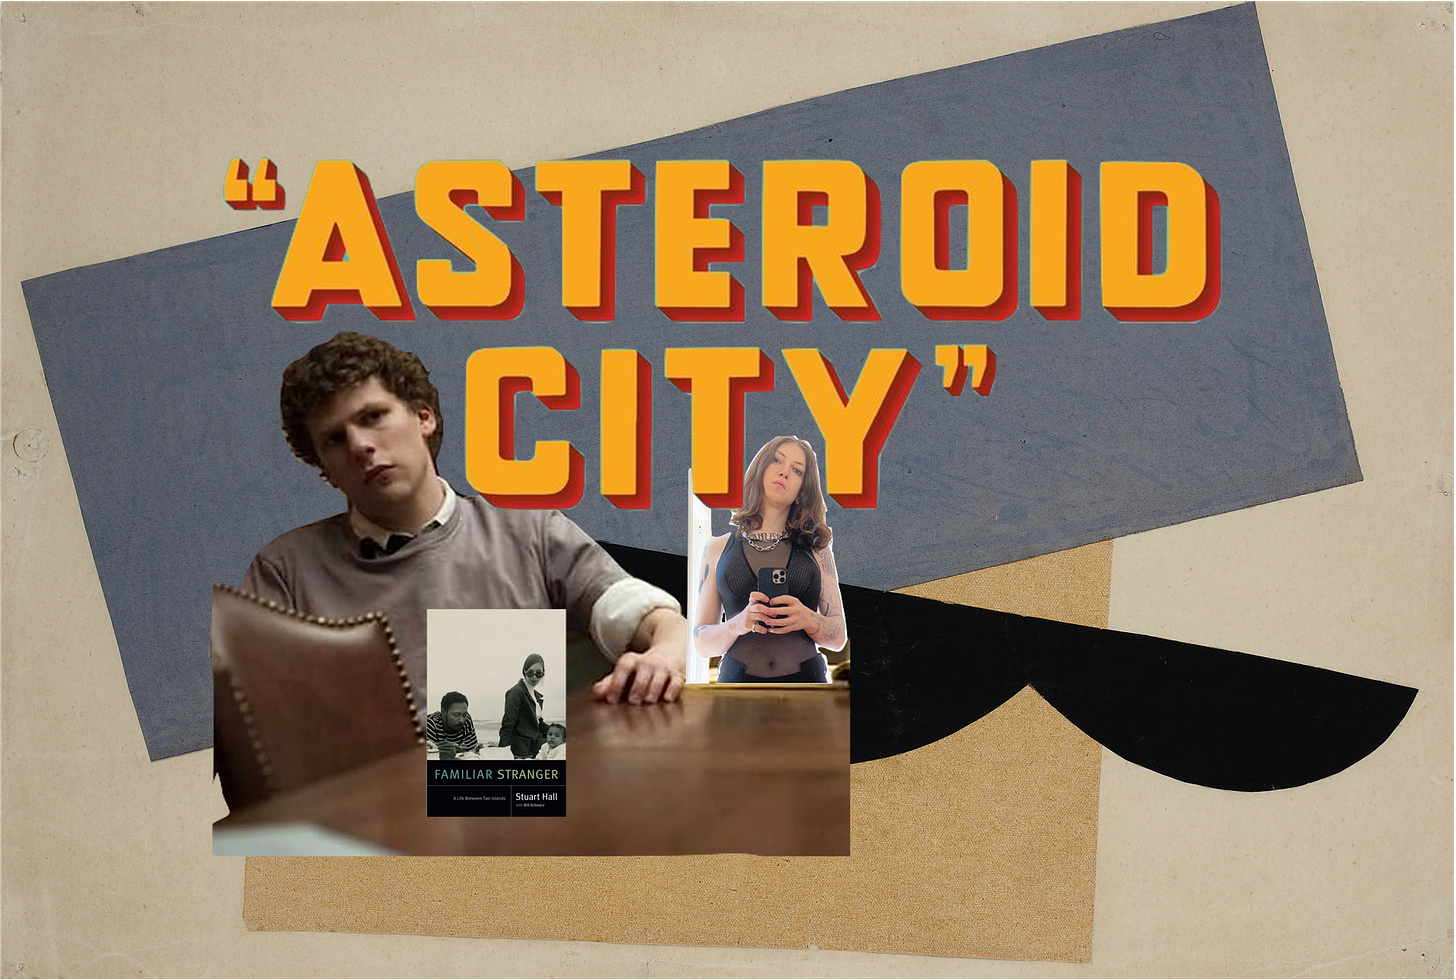 Collage of the poster title "Asteroid City" above, below that a cut out of Jesse Eisenberg playing Mark Zuckerberg in the Social Network (2010) leaning on a desk. On the desk is a book over of "Familiar Stranger" by Stuart Hall. It shows Stuart, his wife Catherine, and their child on a table in front of the open sea. Finally a cut out of Hannah Baer between the T and Y of City in a classic mirror selfie pose.